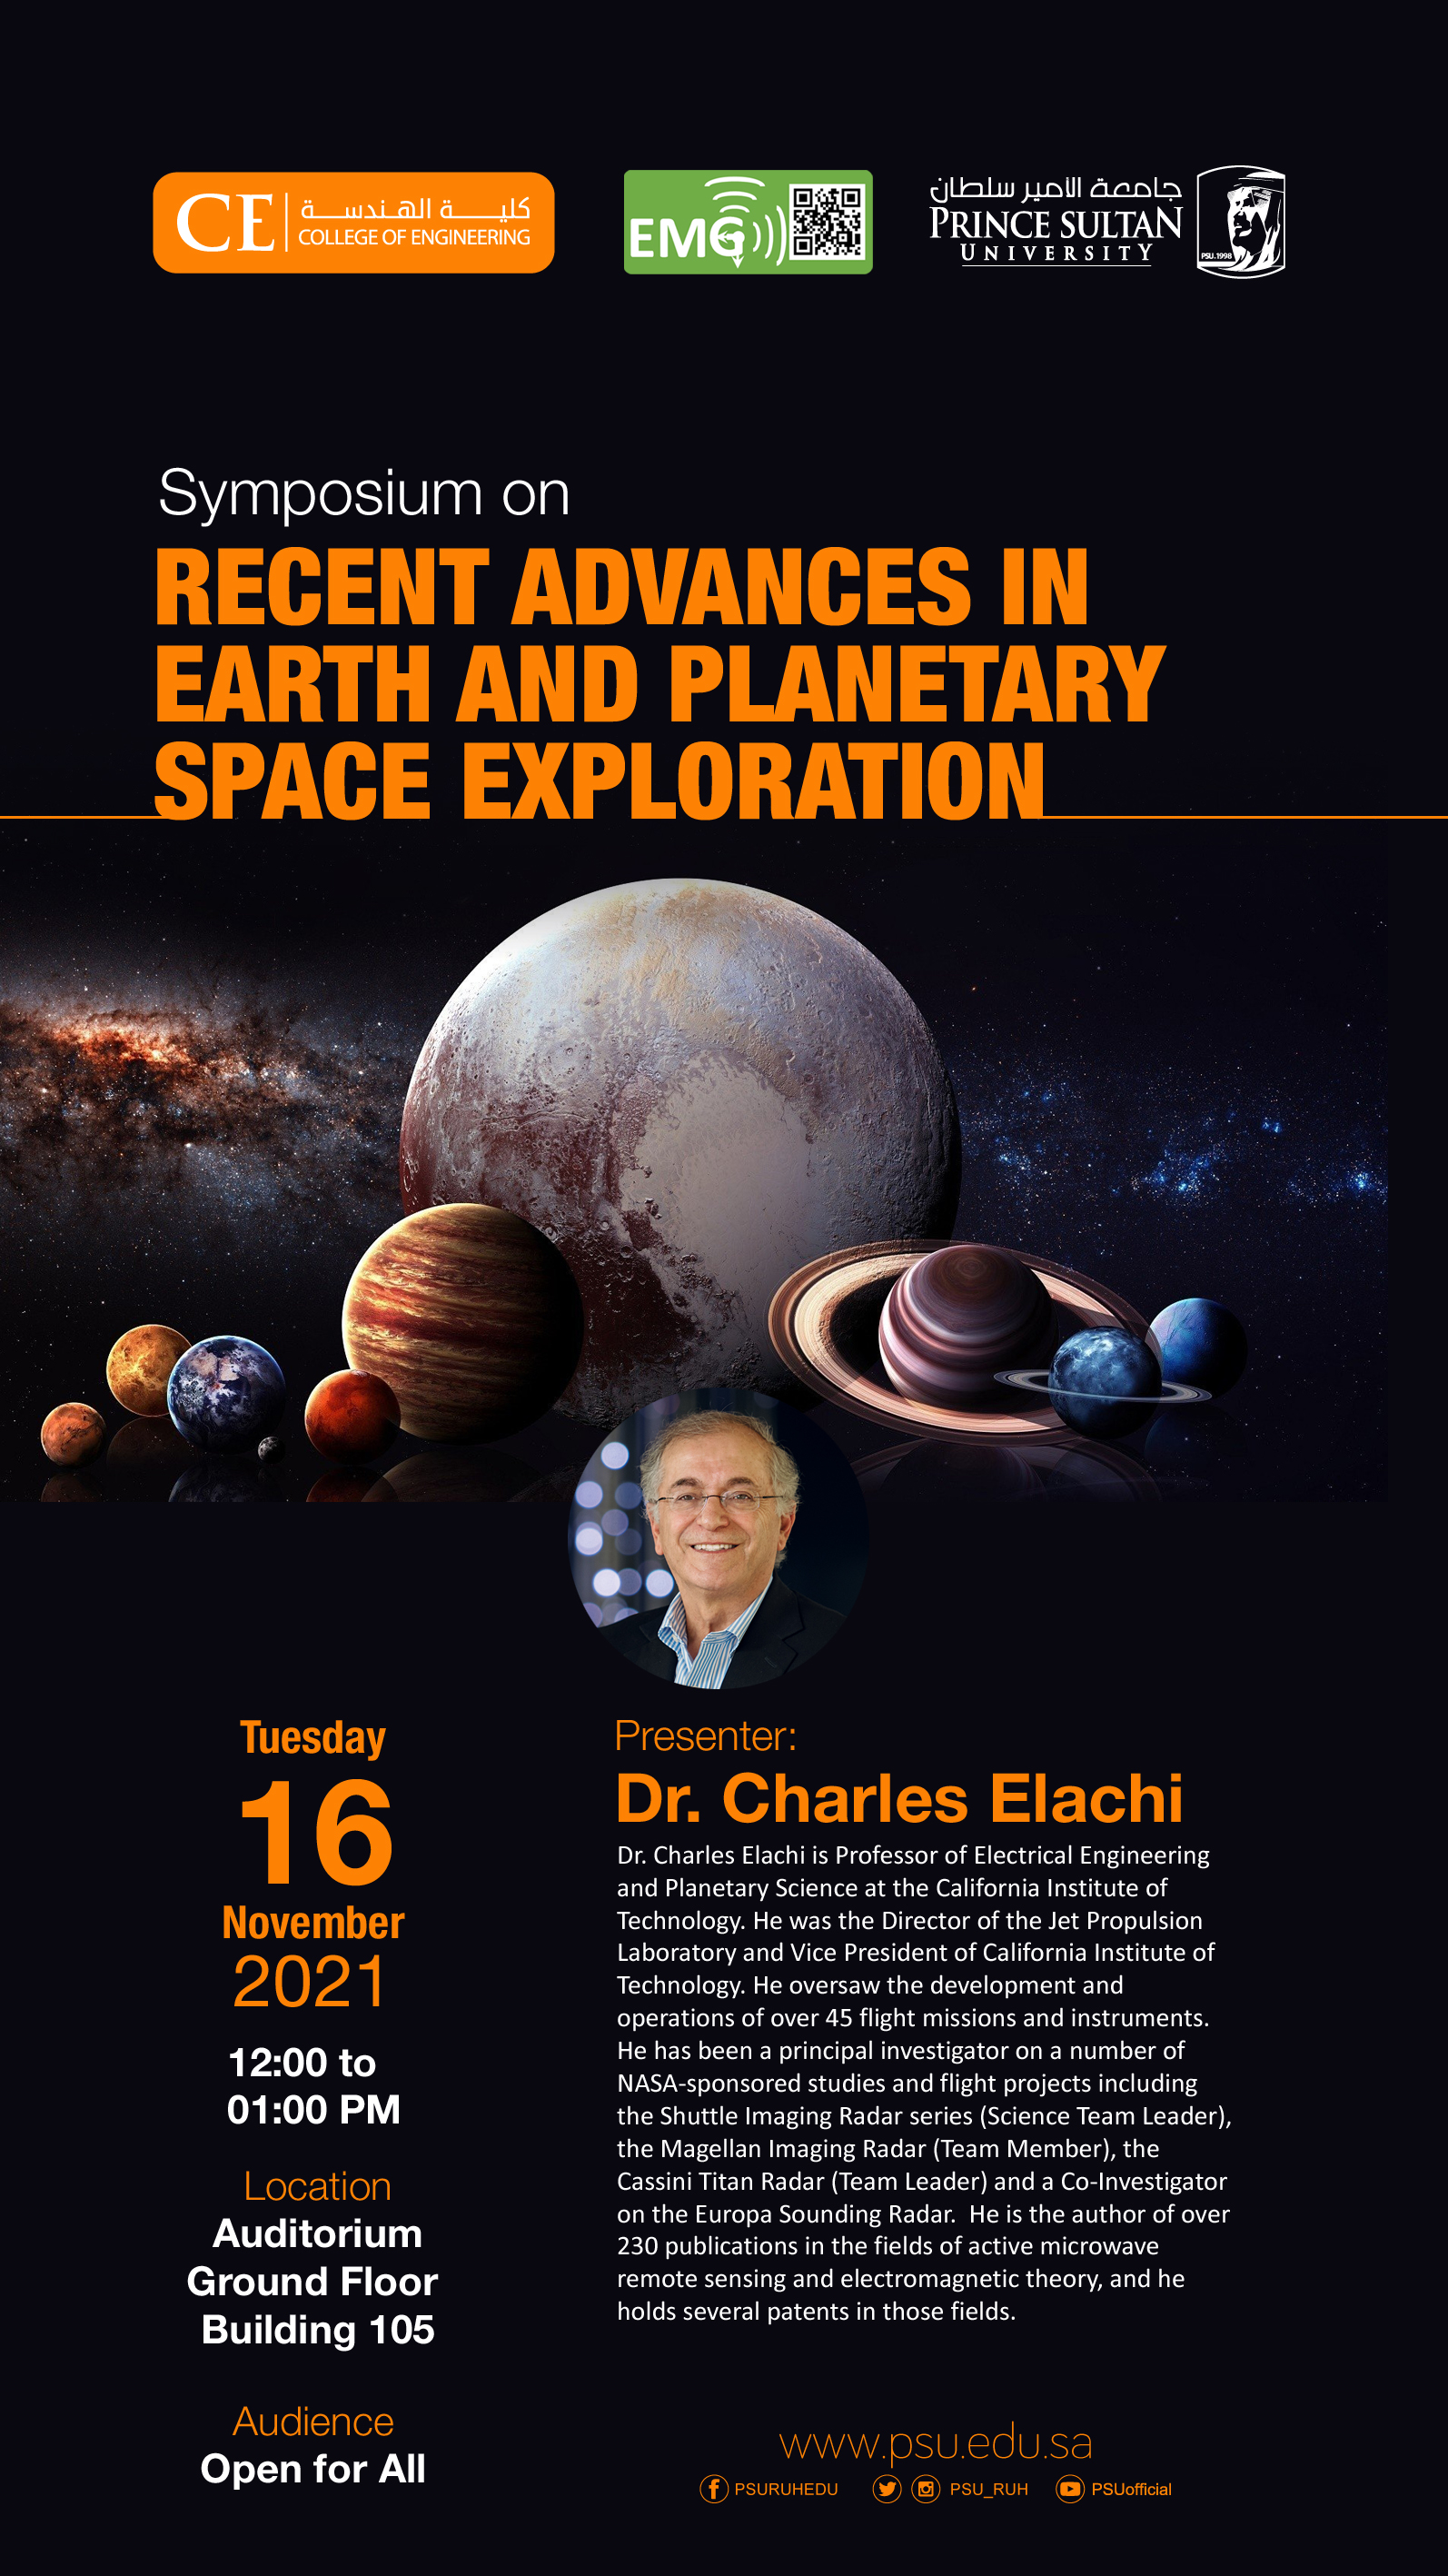 Symposium: Recent Advances in Earth and Planetary Space Exploration